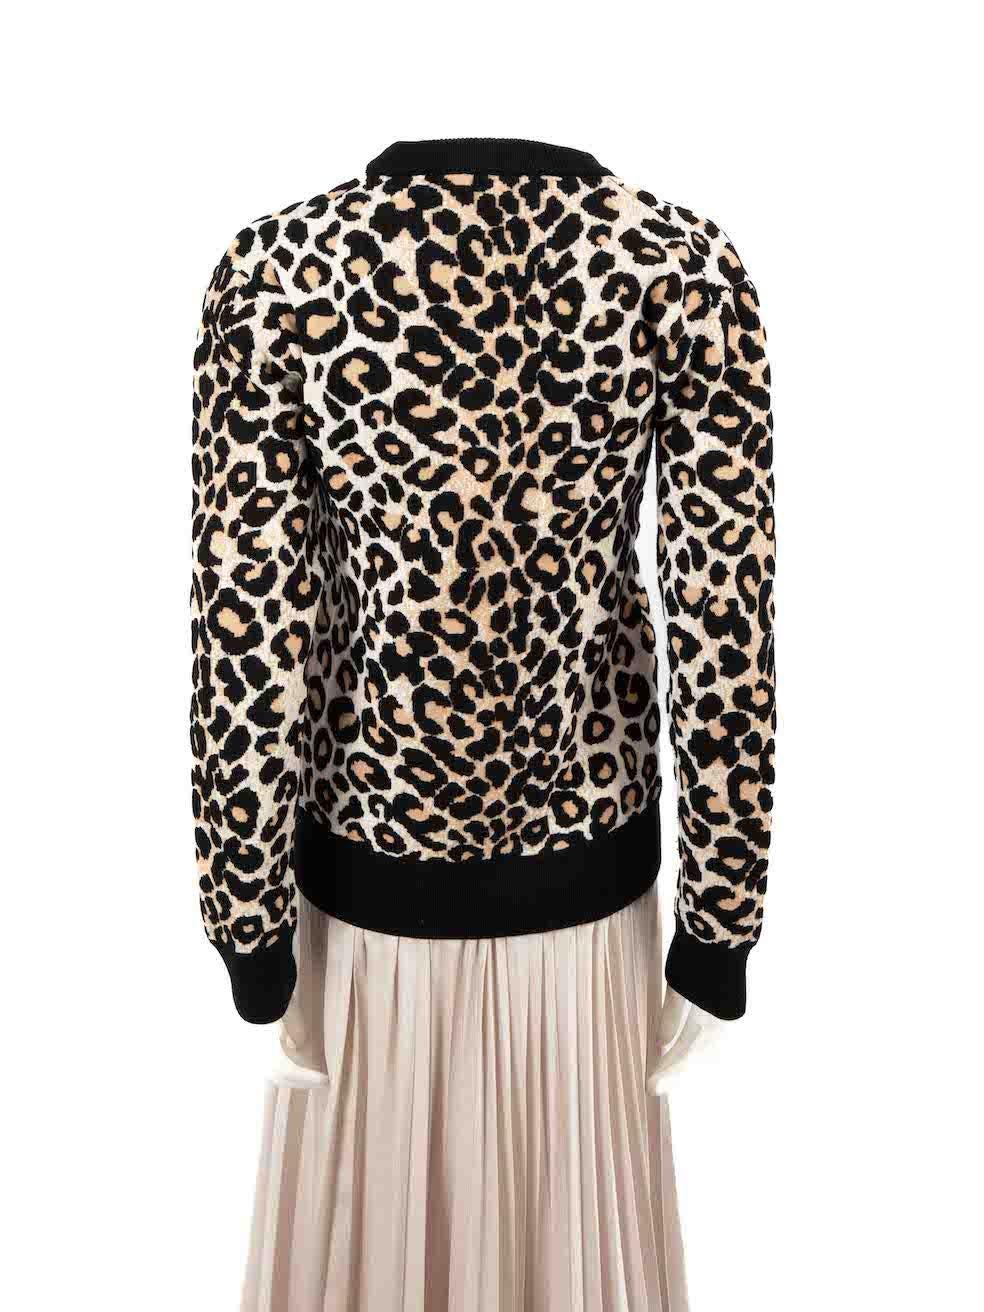 Céline Beige Leopard Print Knit Jumper Size S In Excellent Condition For Sale In London, GB